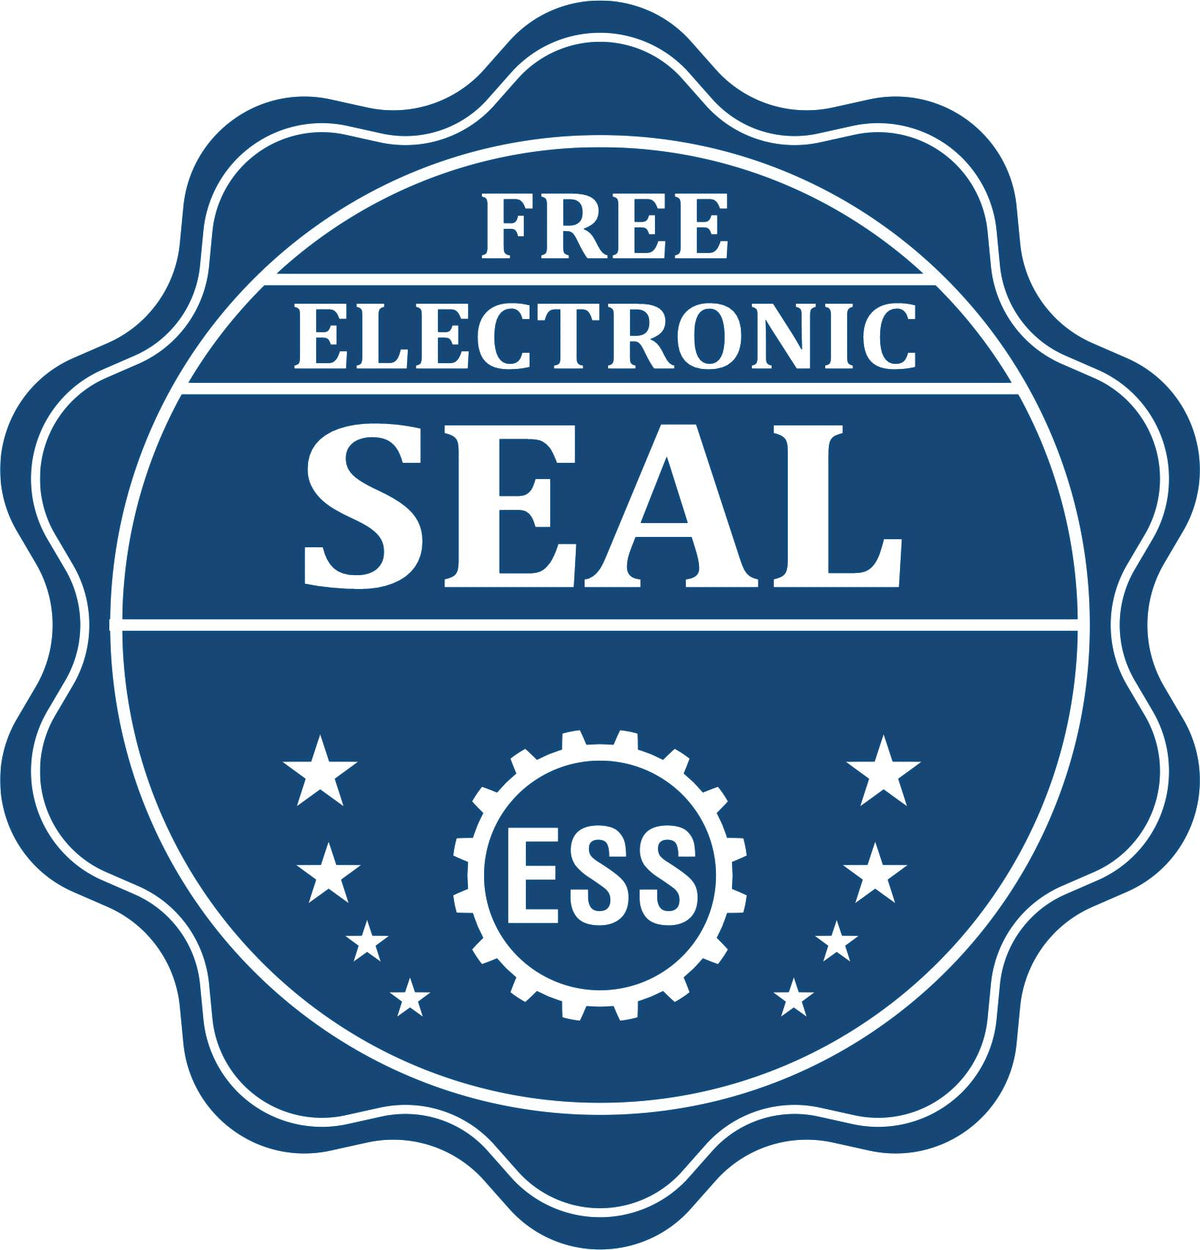 A badge showing a free electronic seal for the State of New York Extended Long Reach Engineer Seal with stars and the ESS gear on the emblem.